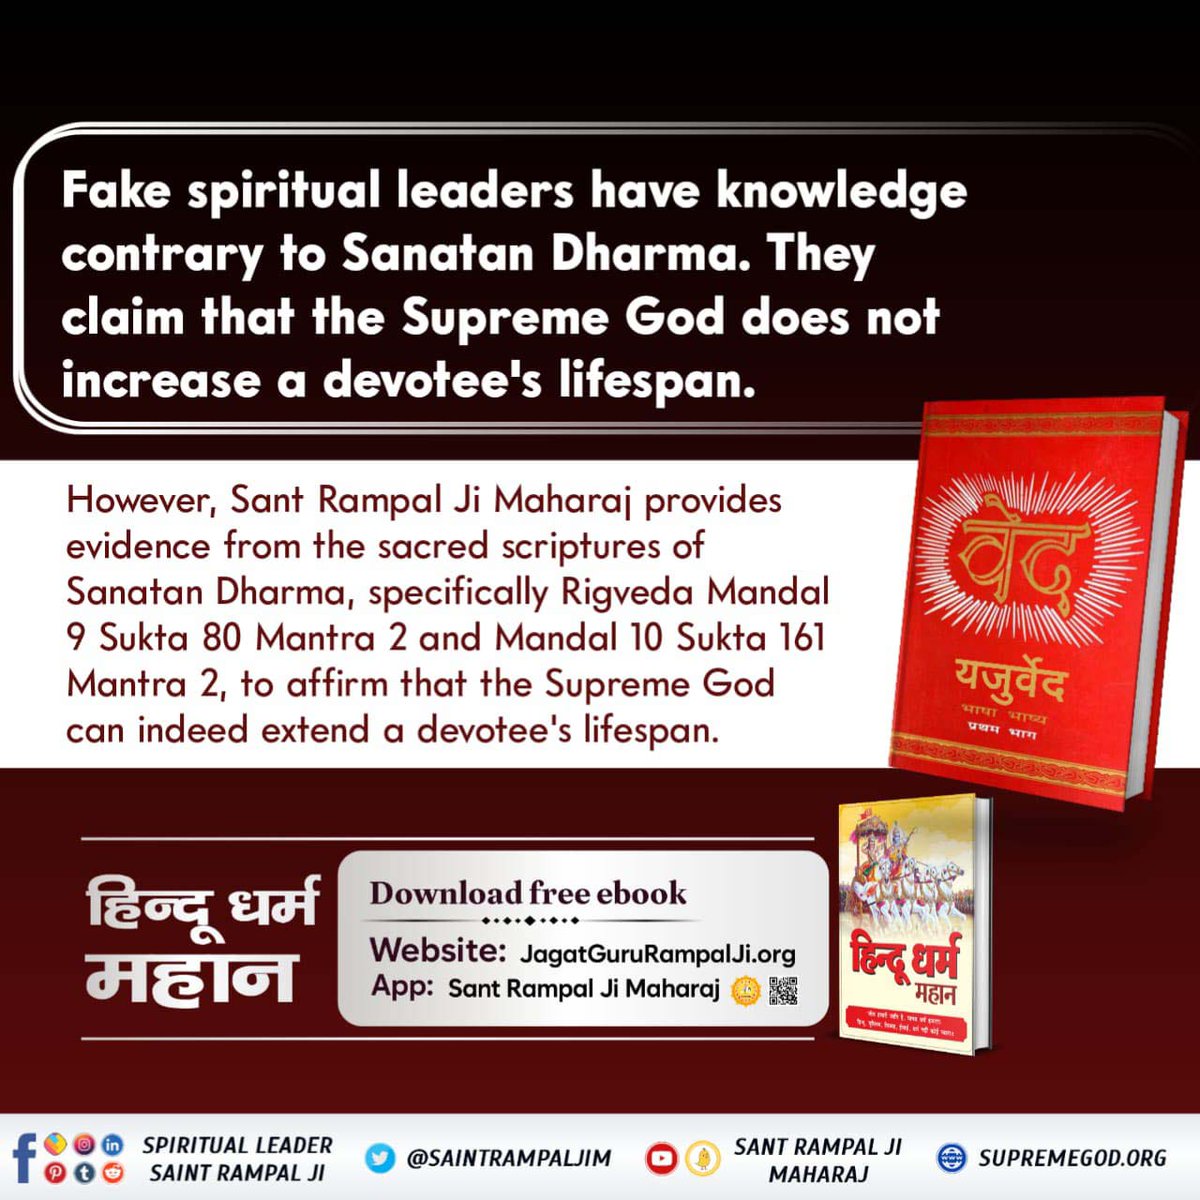 #God_Morning_Friday
Fake spiritual leaders have knowledge contrary to Sanatan Dharma. They claim that the Supreme God does not increase a devotee's lifespan.
However, Sant Rampal Ji Maharaj provides evidence from the sacred scriptures of Sanatan Dharma, specifically Rigveda Mand